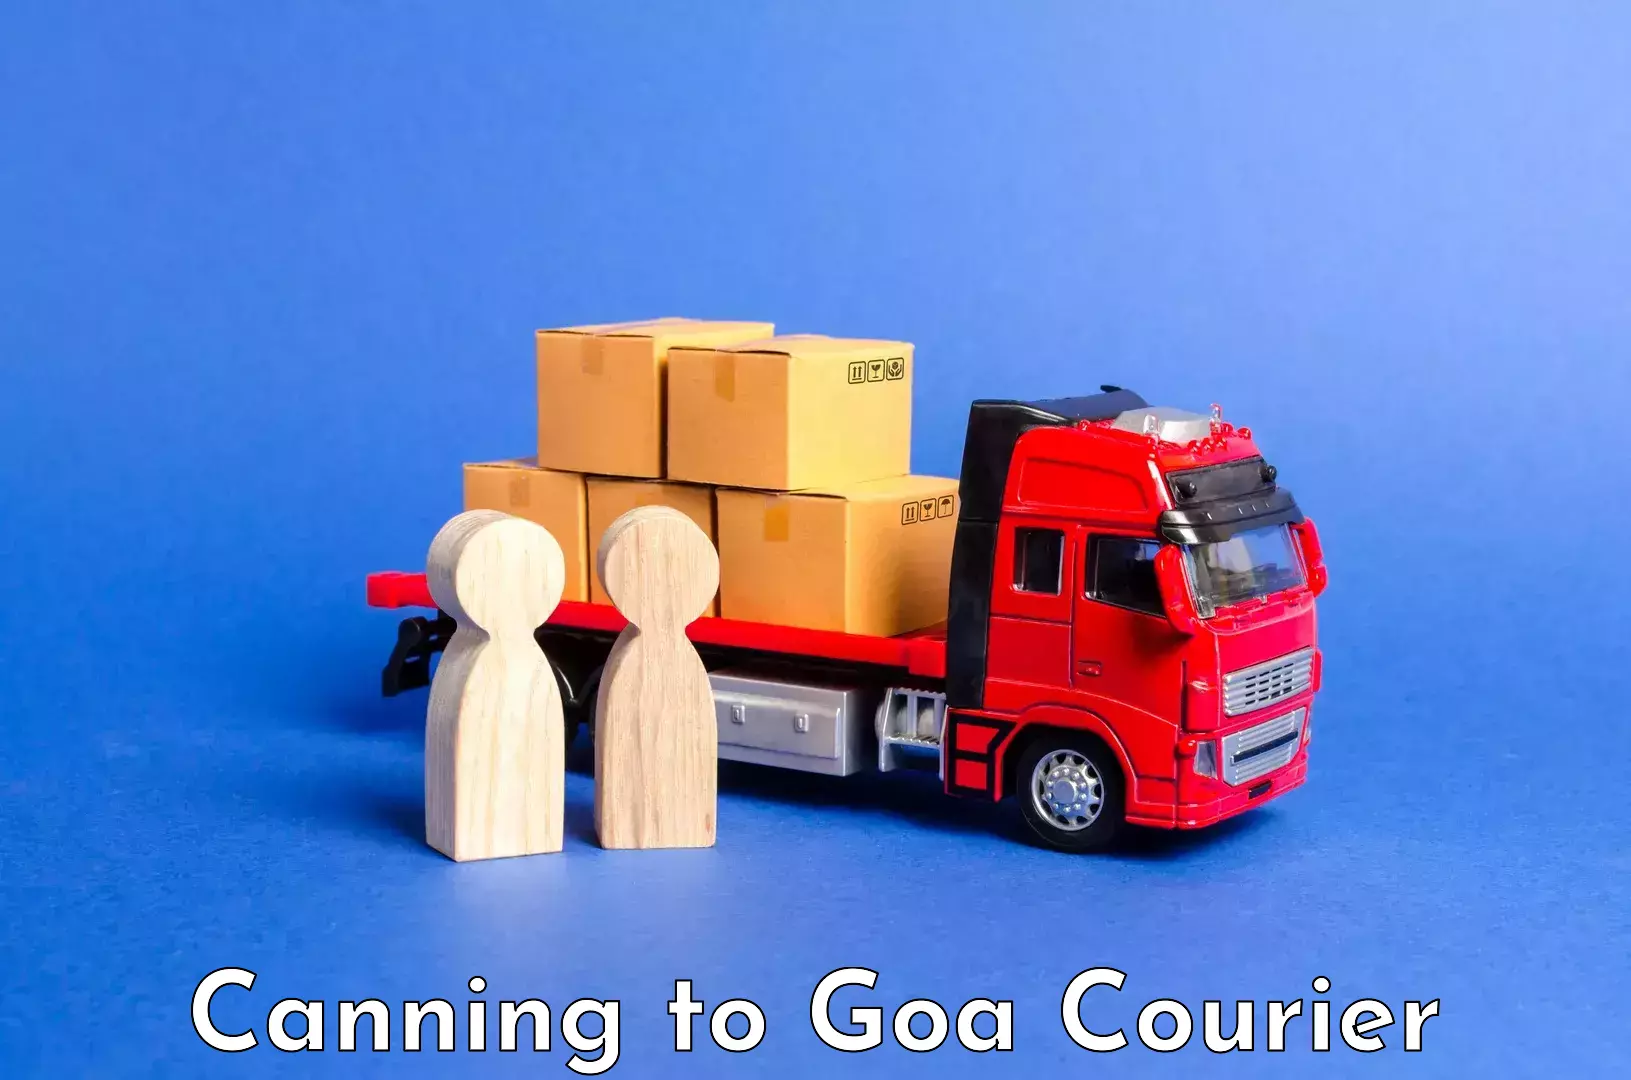 Hassle-free luggage shipping in Canning to South Goa